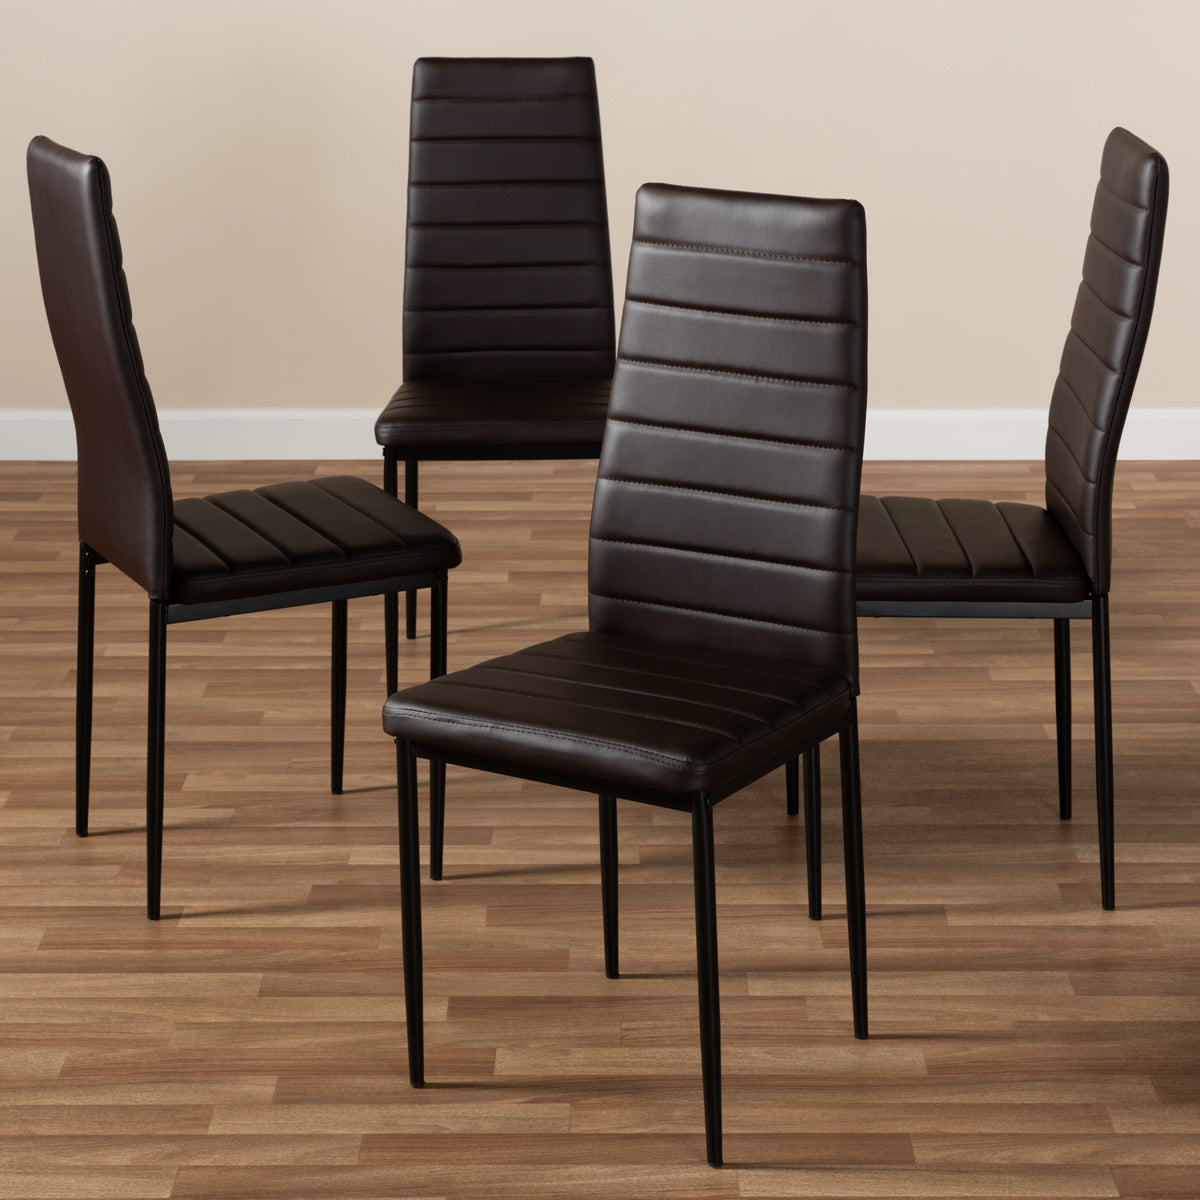 Baxton Studio Armand Modern and Contemporary Brown Faux Leather Upholstered Dining Chair (Set of 4) Baxton Studio-dining chair-Minimal And Modern - 4